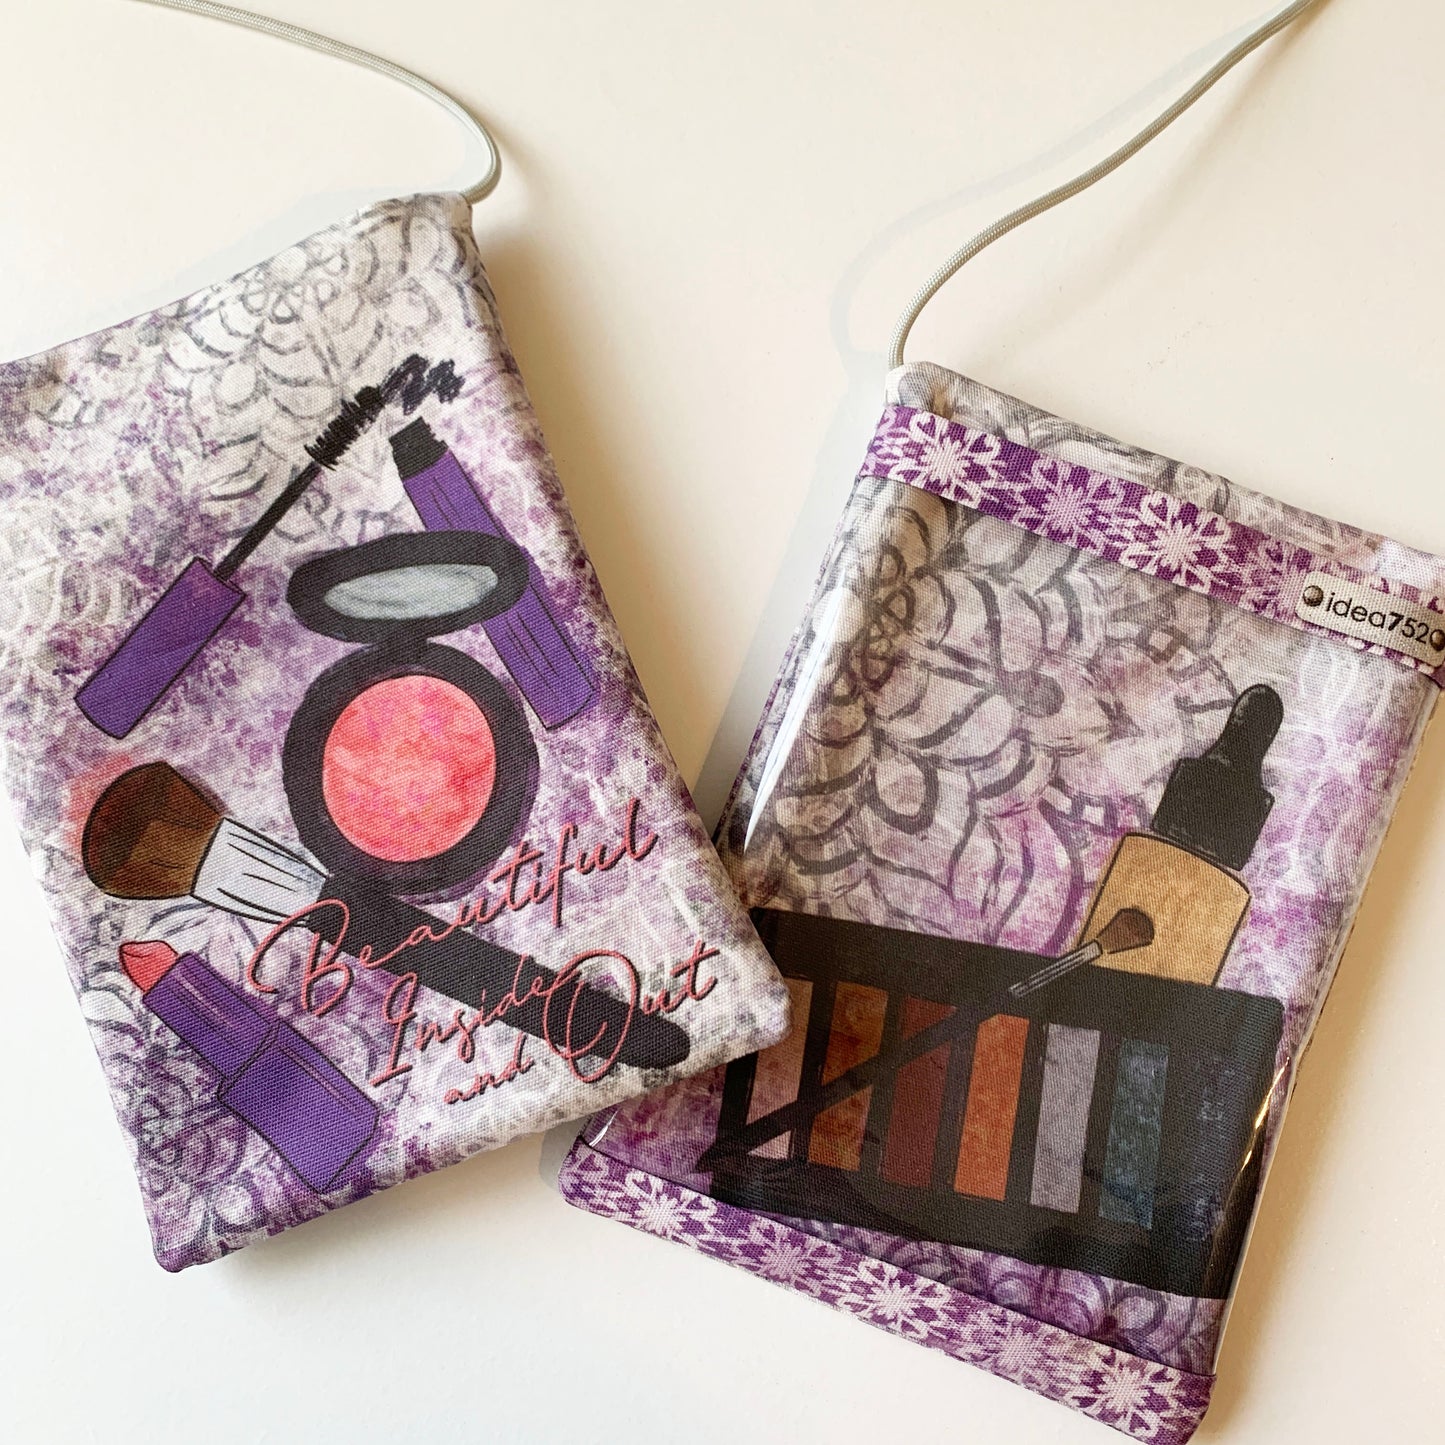 MICHELLE - Handmade purse with beauty/makeup theme